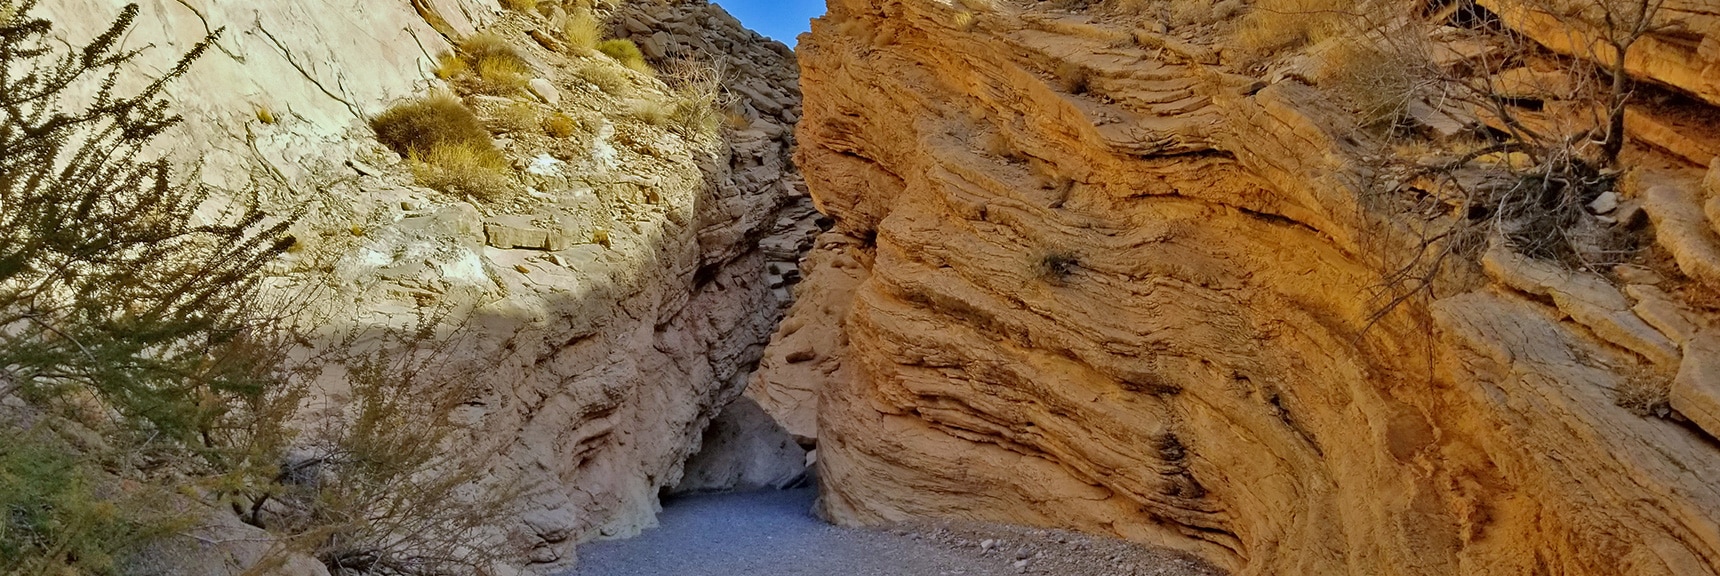 Entrance to the Narrows | Anniversary Narrows | Muddy Mountains Wilderness, Nevada